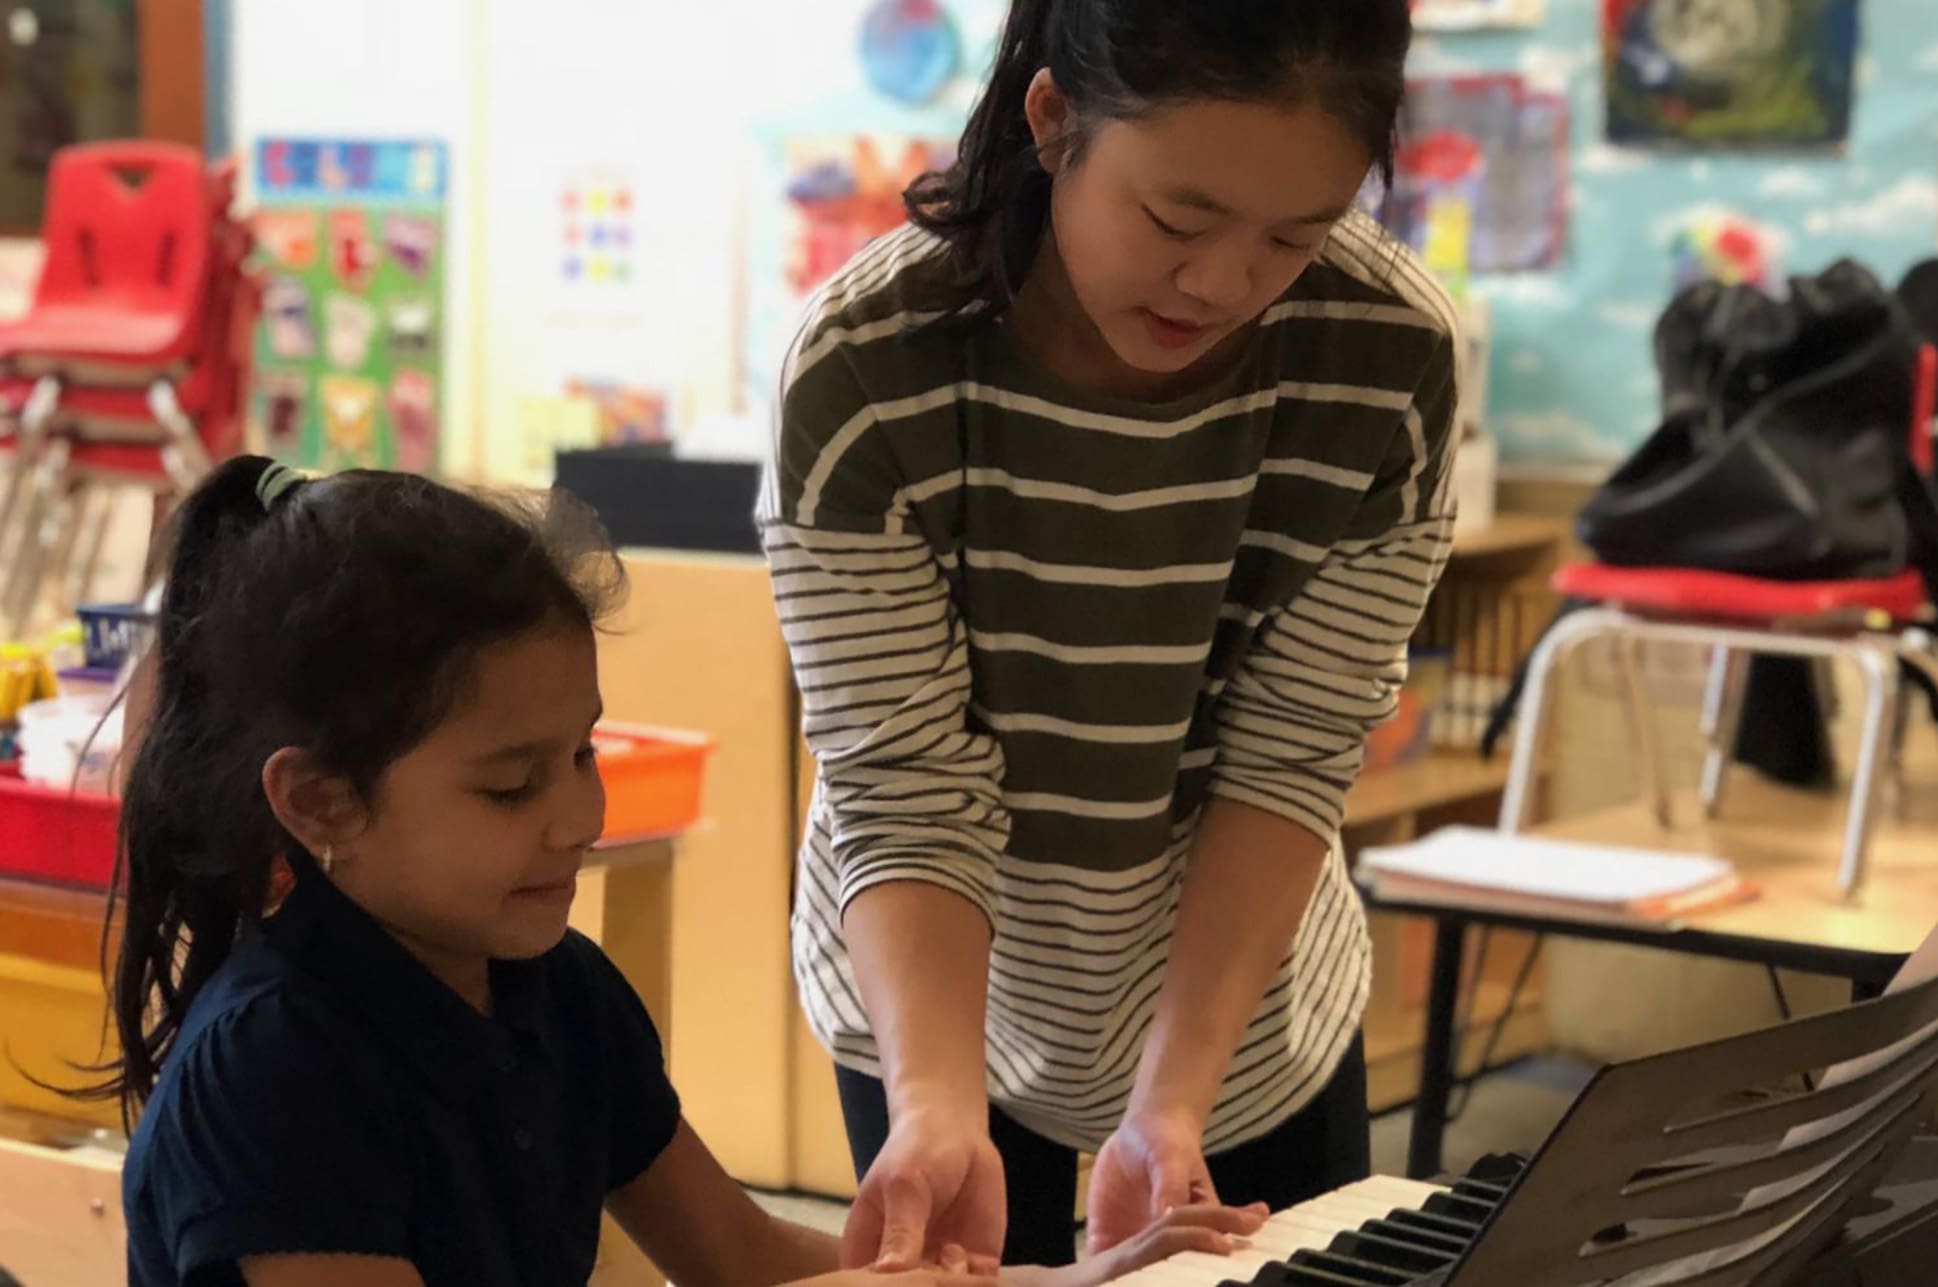 A person teaching a young child to play piano in a classroom.